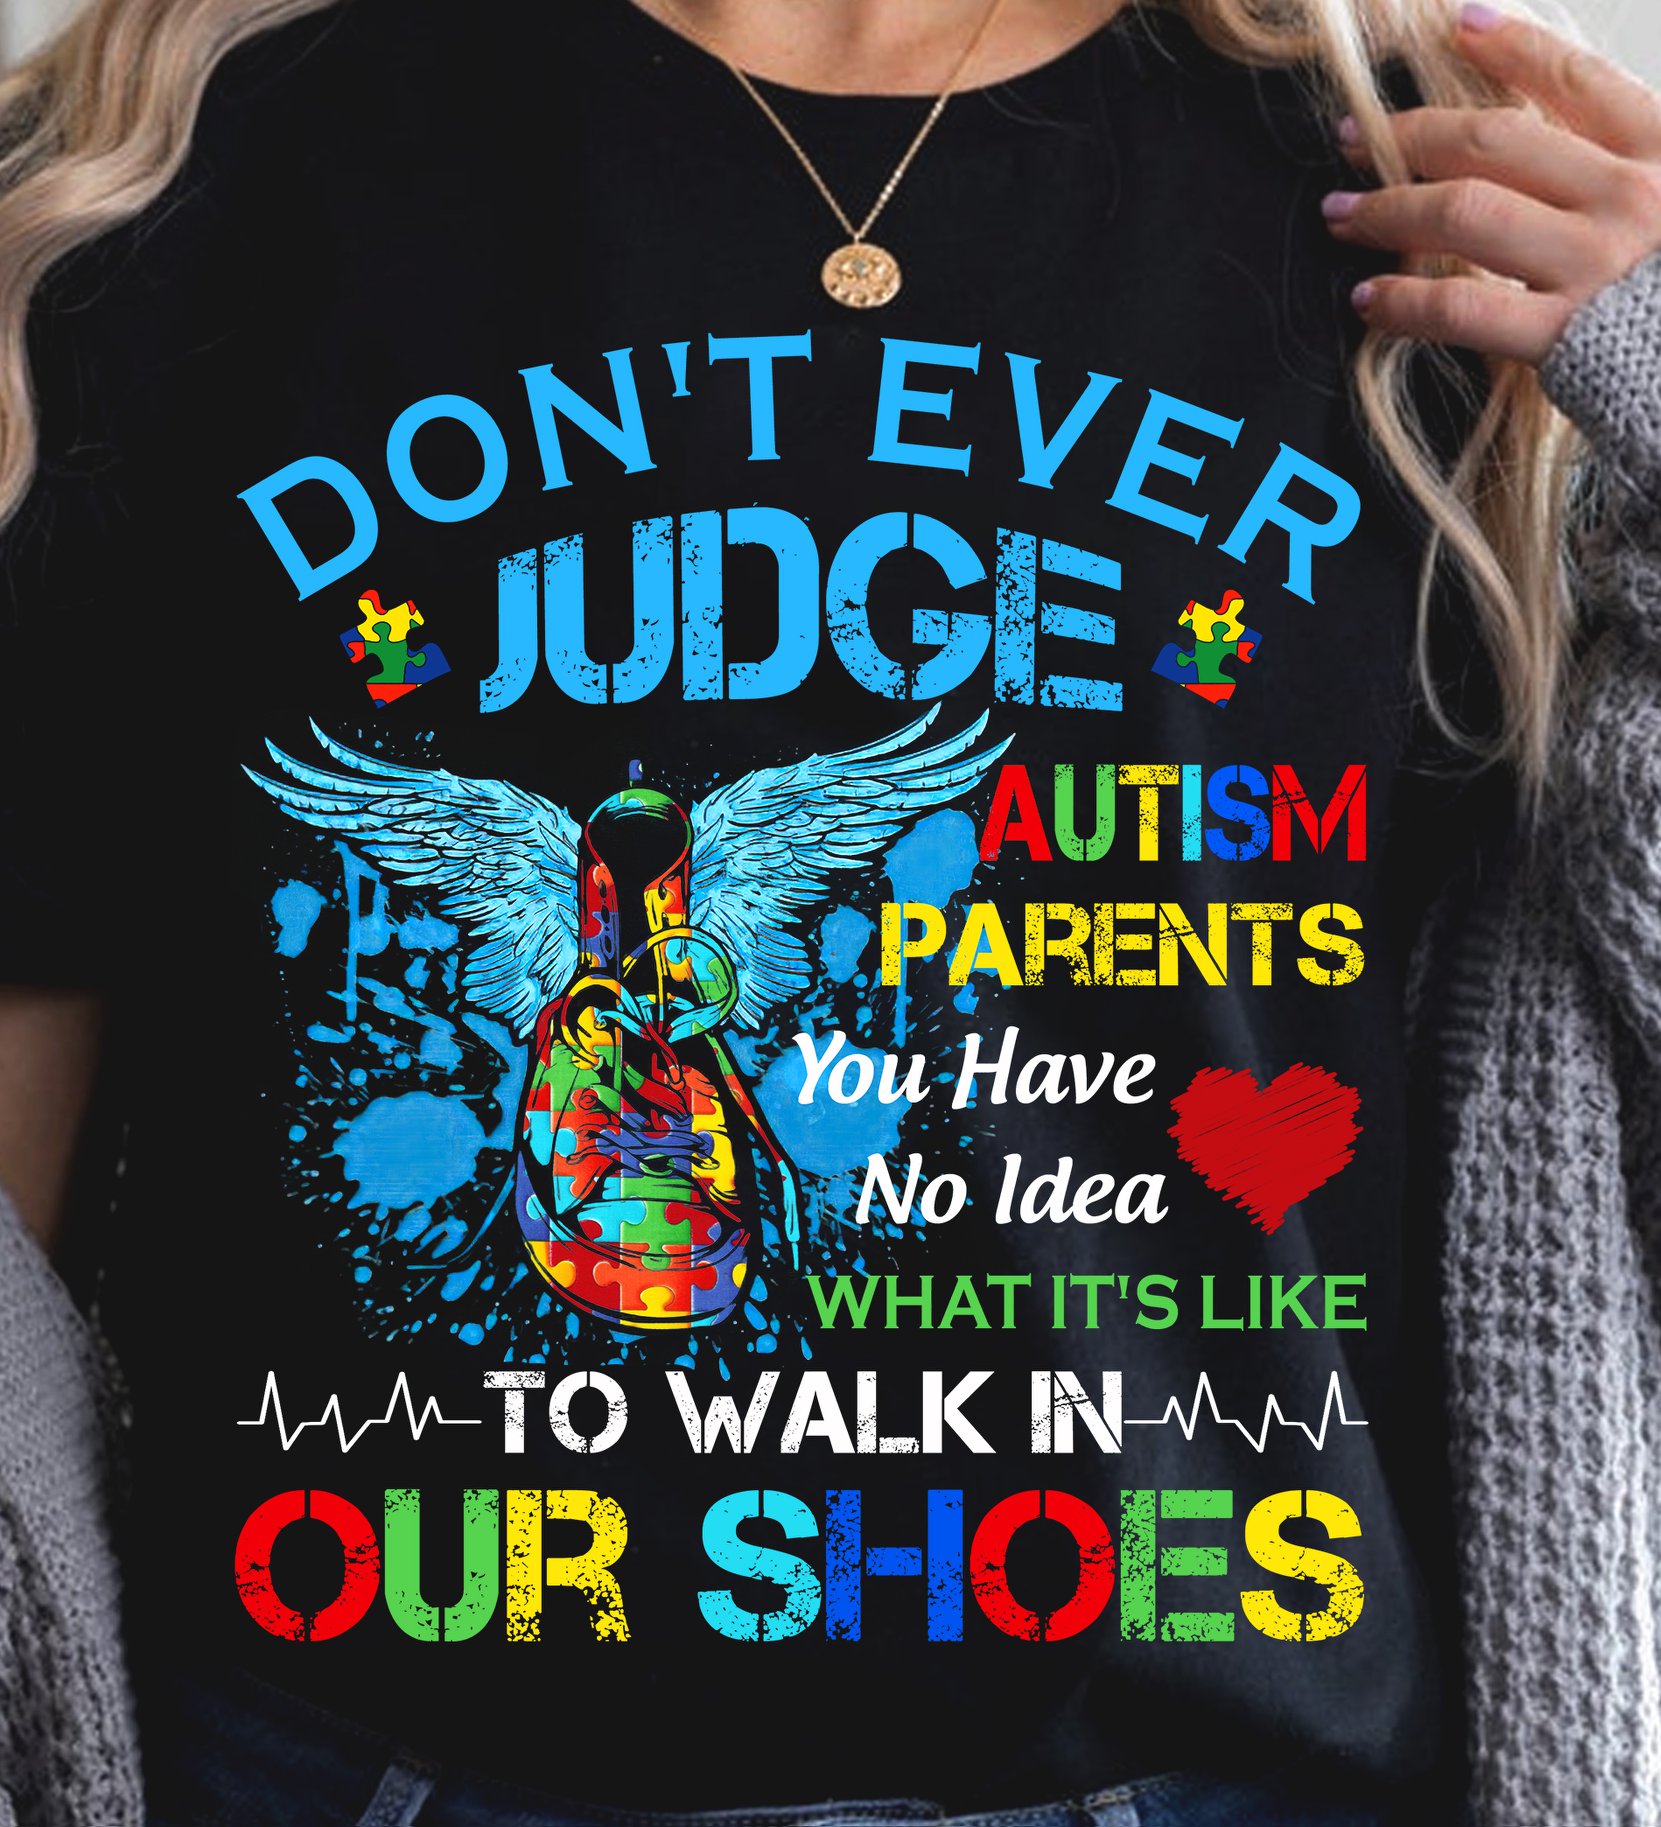 Don't ever judge autism parents you have no idea what it's like to walk in our shoes